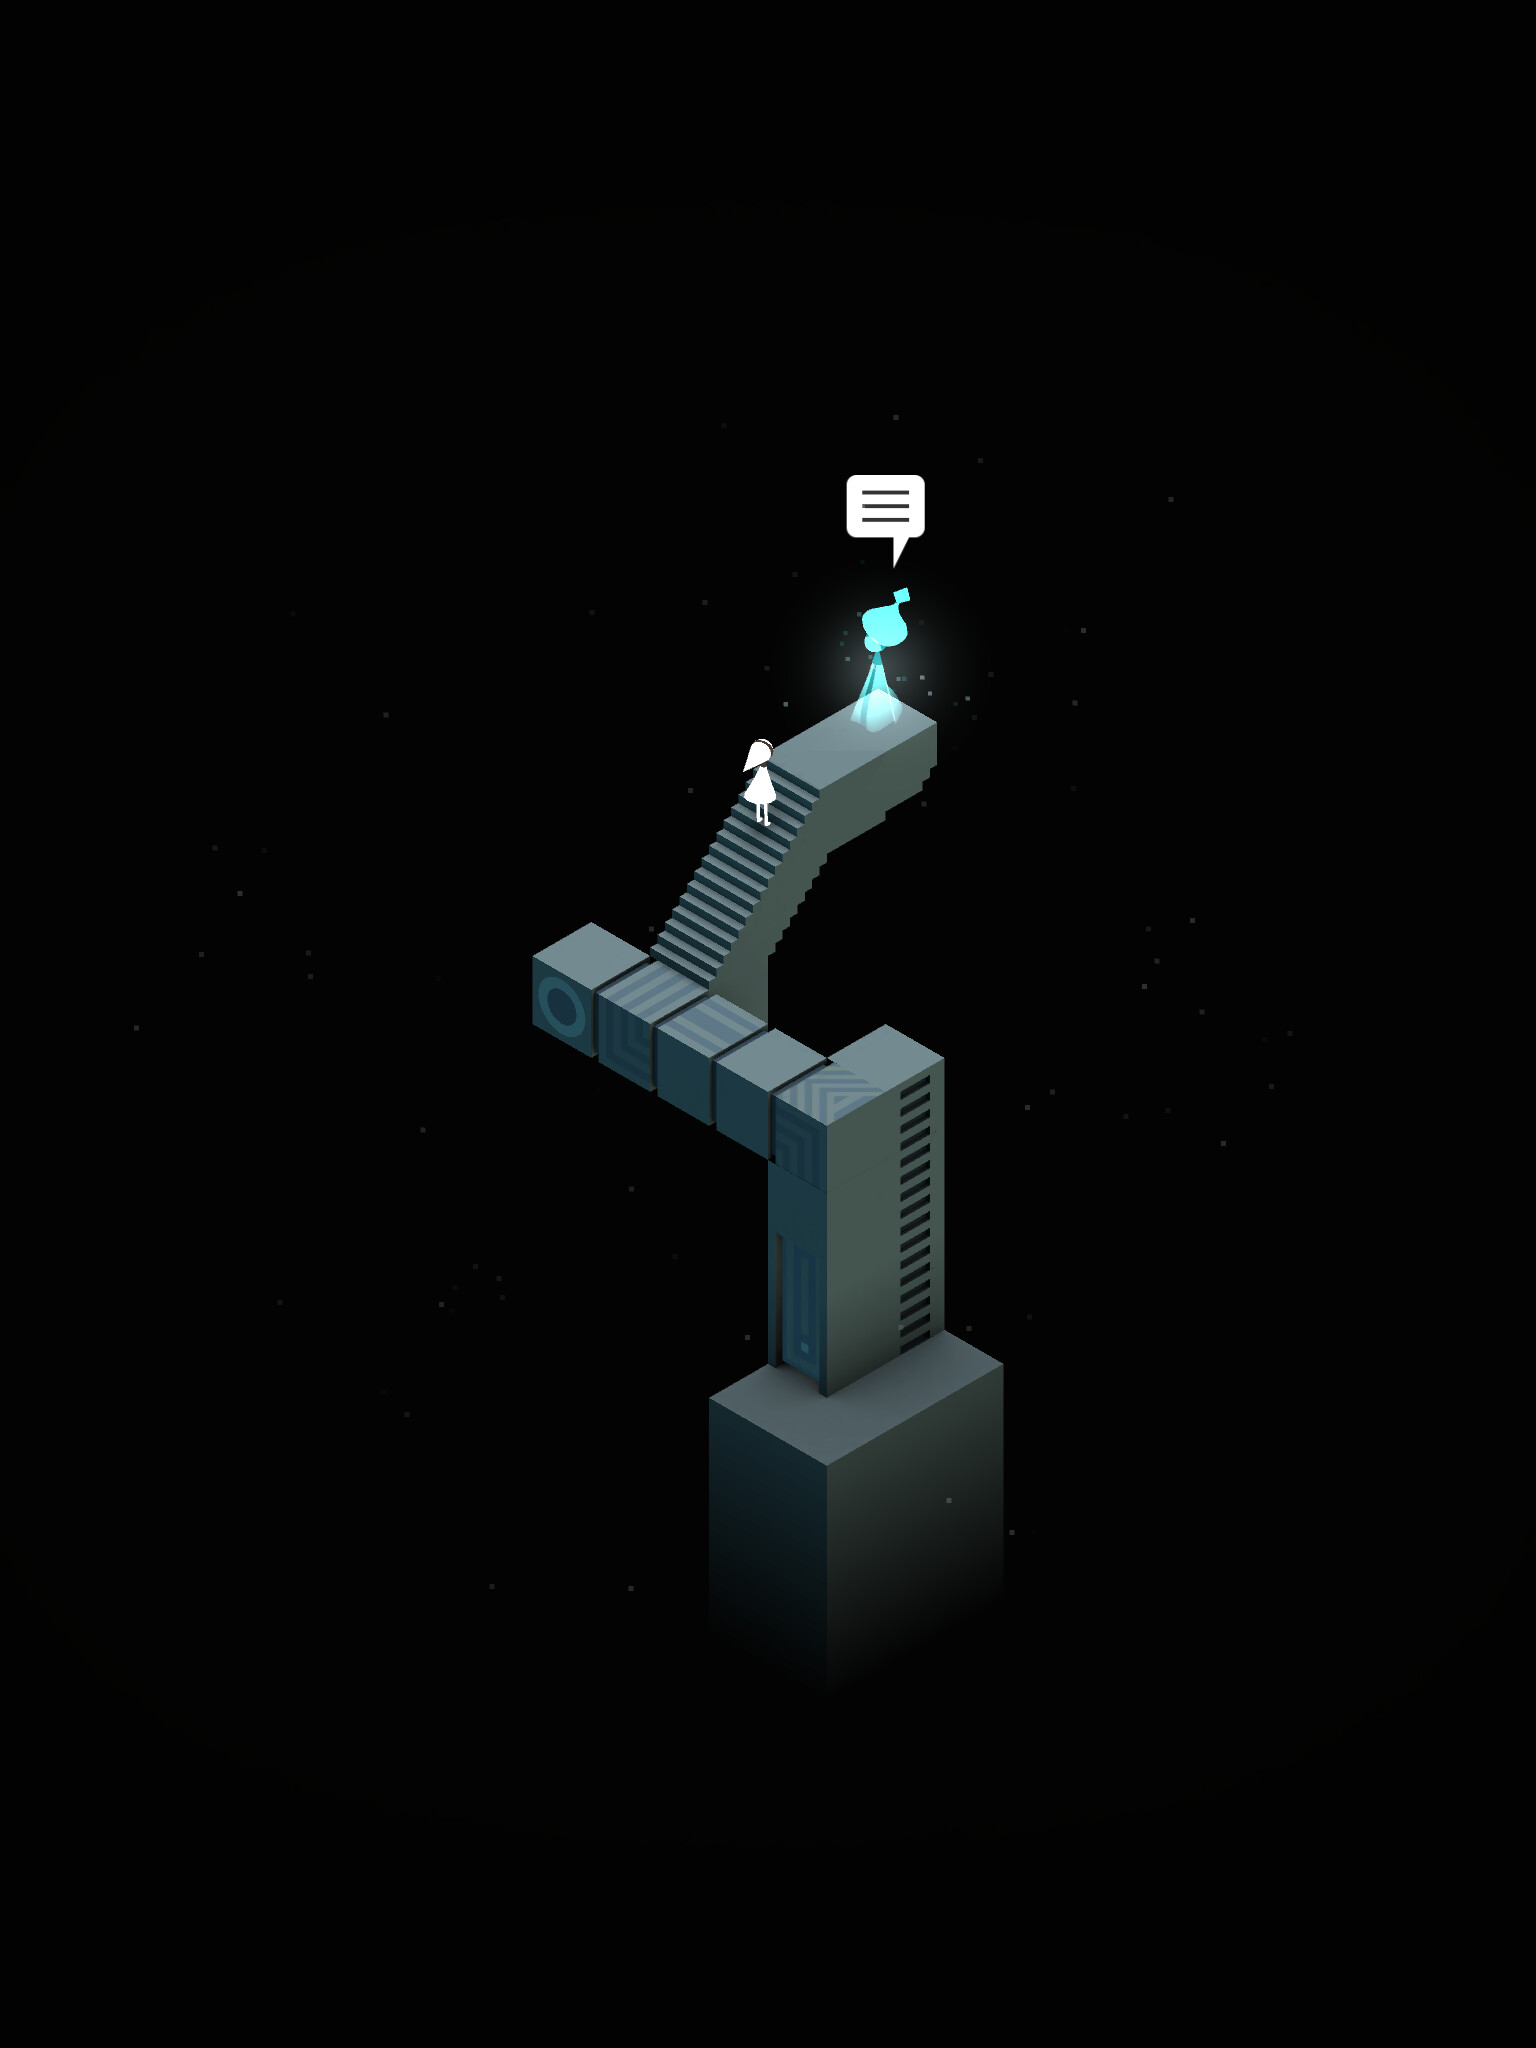 Monument Valley: The game, where the player character Princess Ida journeys through mazes of optical illusions and impossible objects, which are referred to as "sacred geometry" in-game, as she travels to be forgiven for something. 1540x2050 HD Wallpaper.